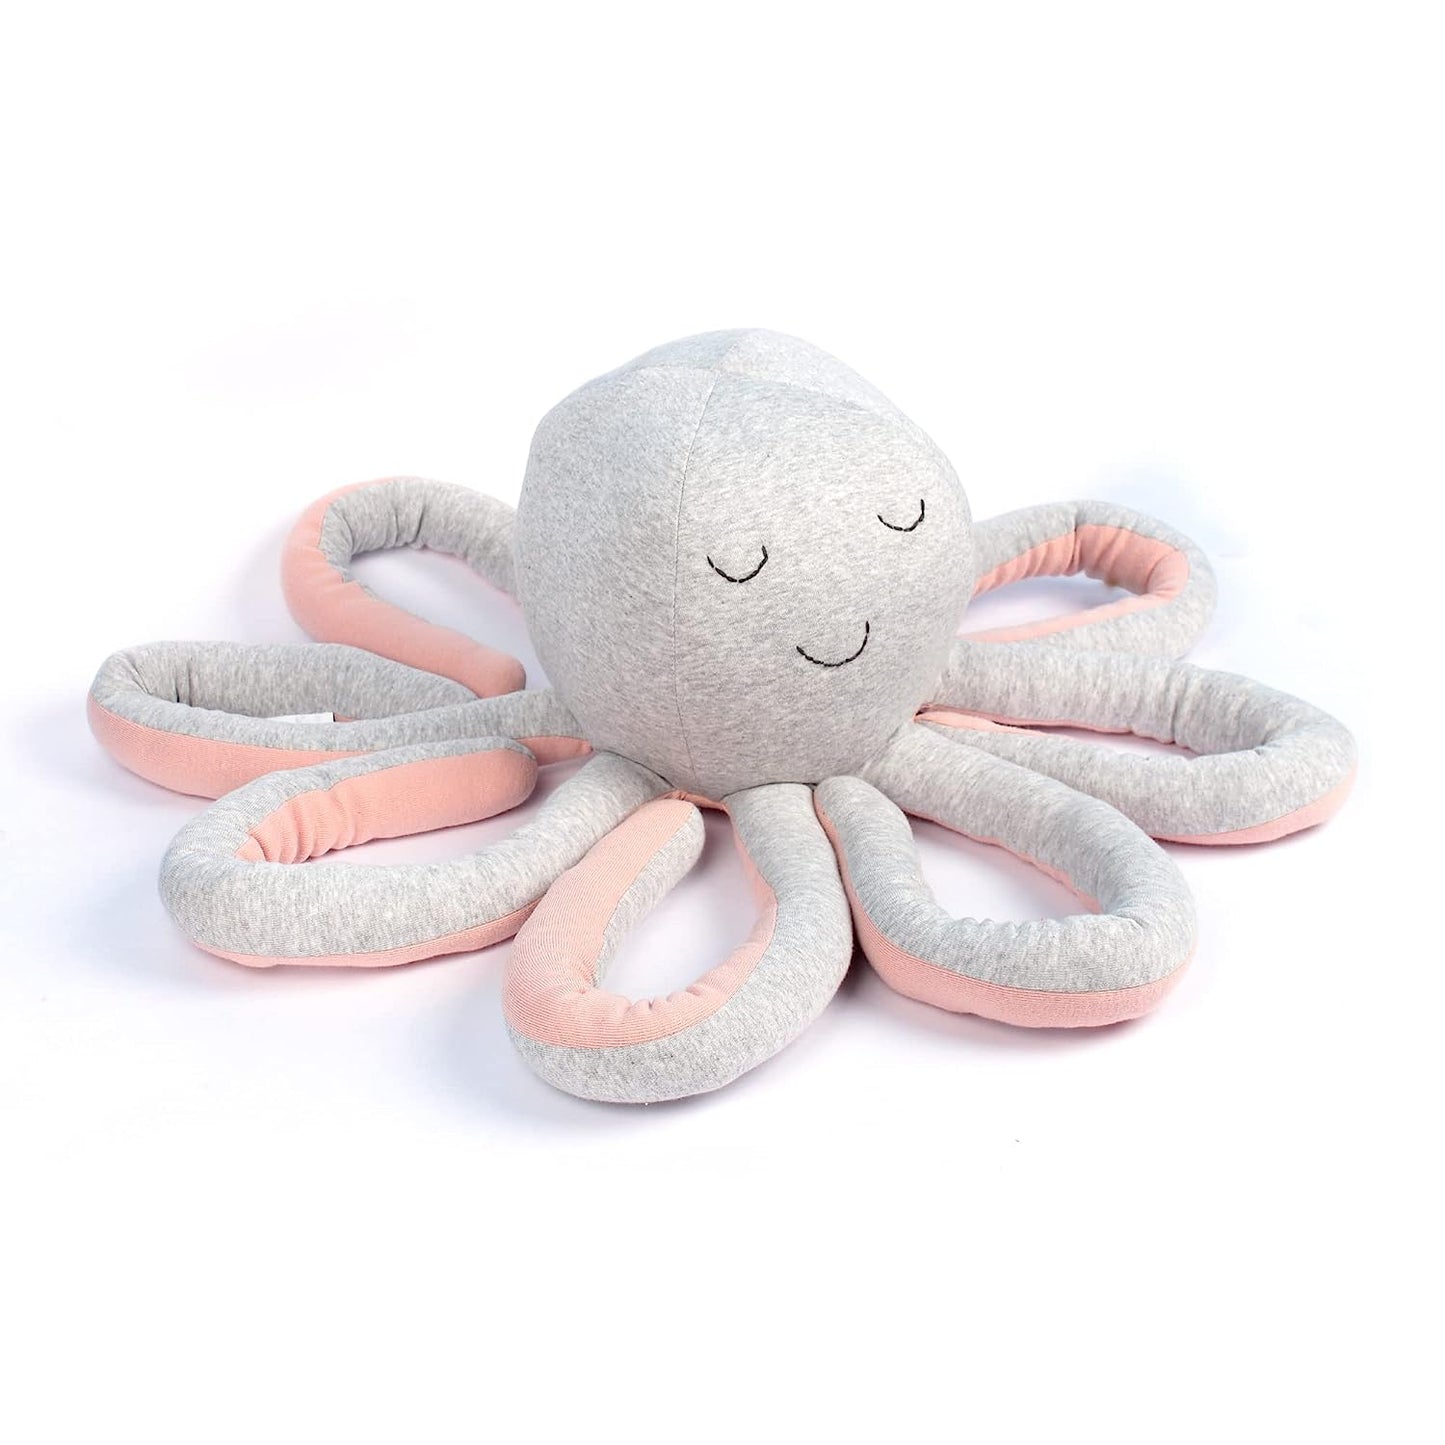 18 inches Octopus Plush Soft Toys for Kids (Pink Gray)